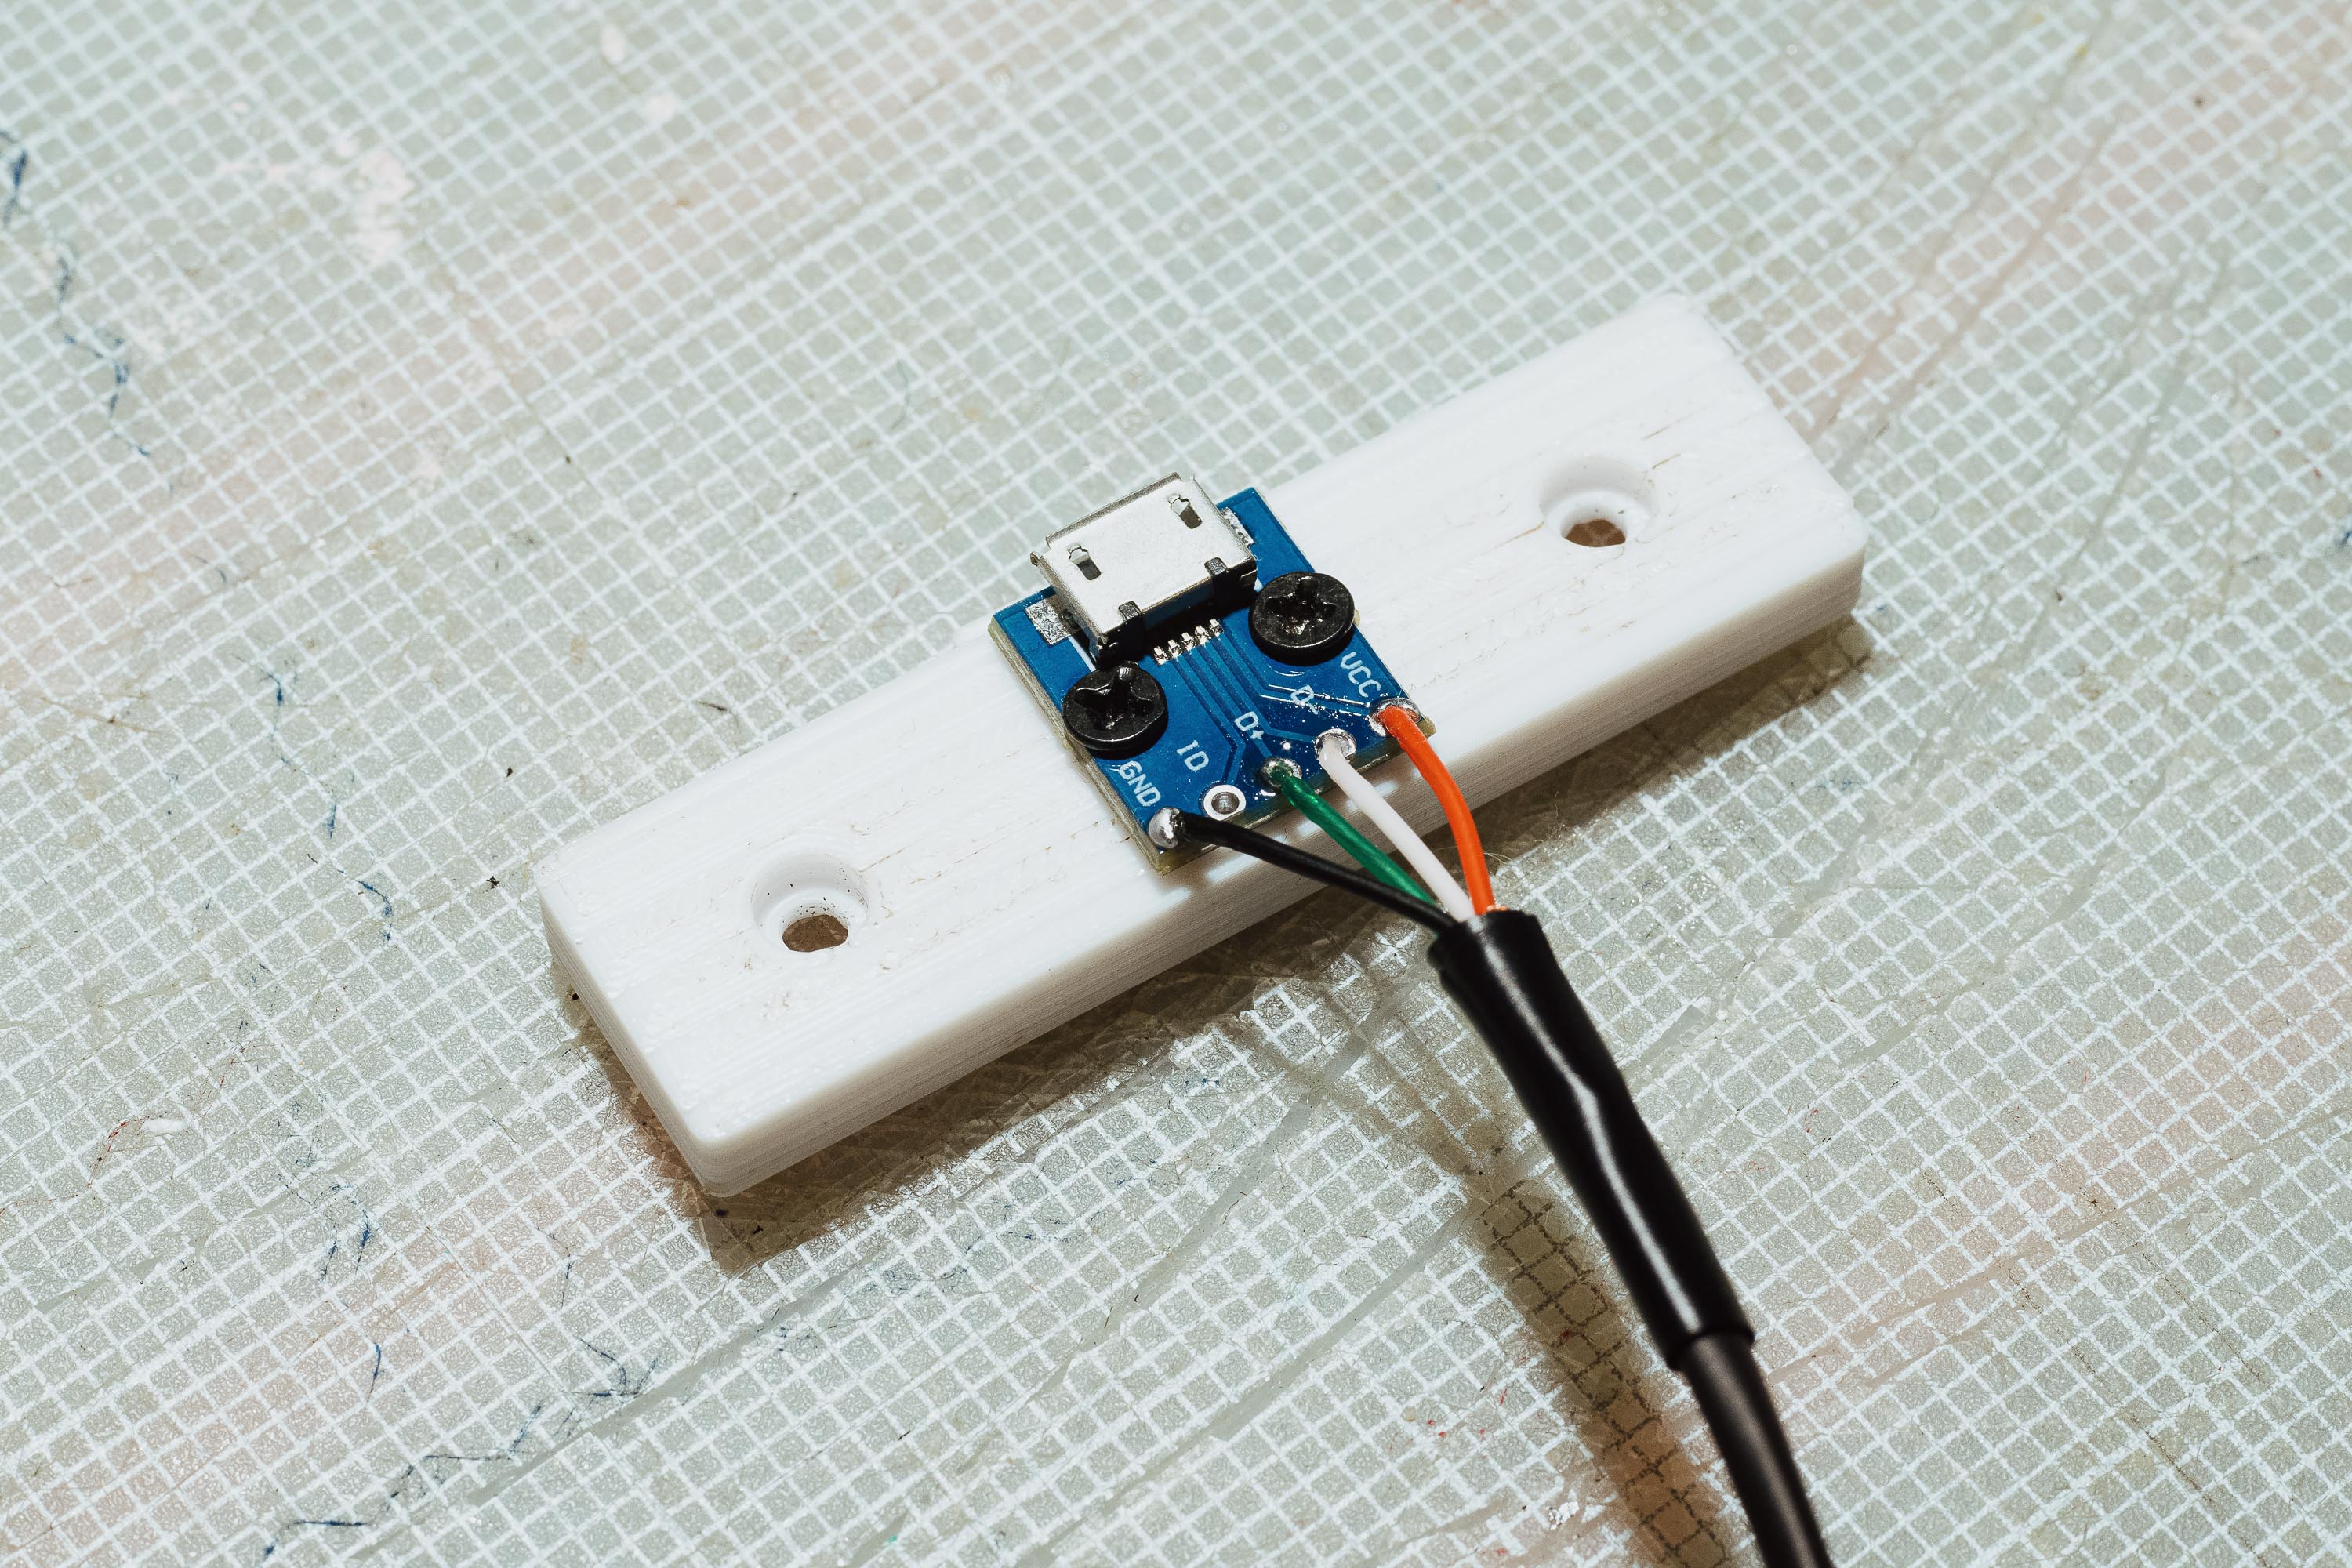 Receptacle mounted to printed part